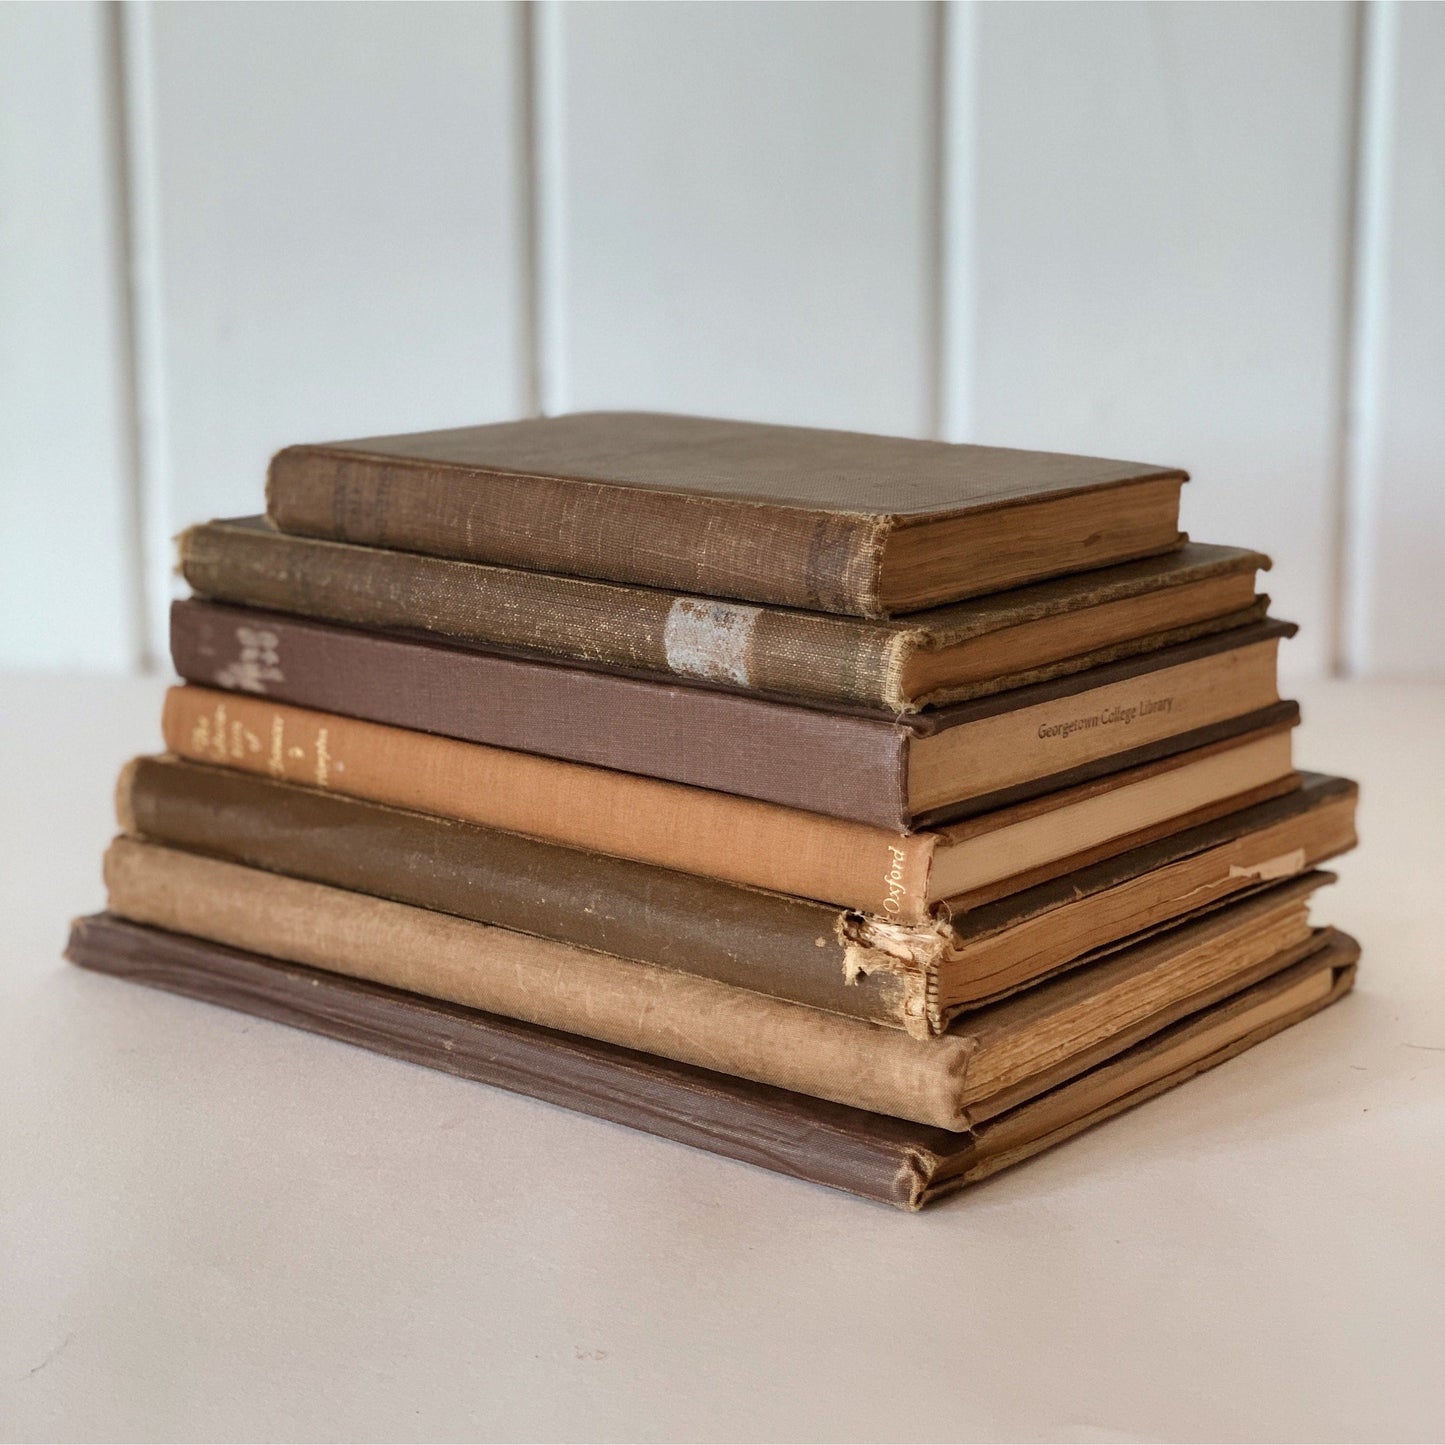 Brown Decorative Books, Shabby Chic Books for Decor, Neutral Book Set, No Spine Letering